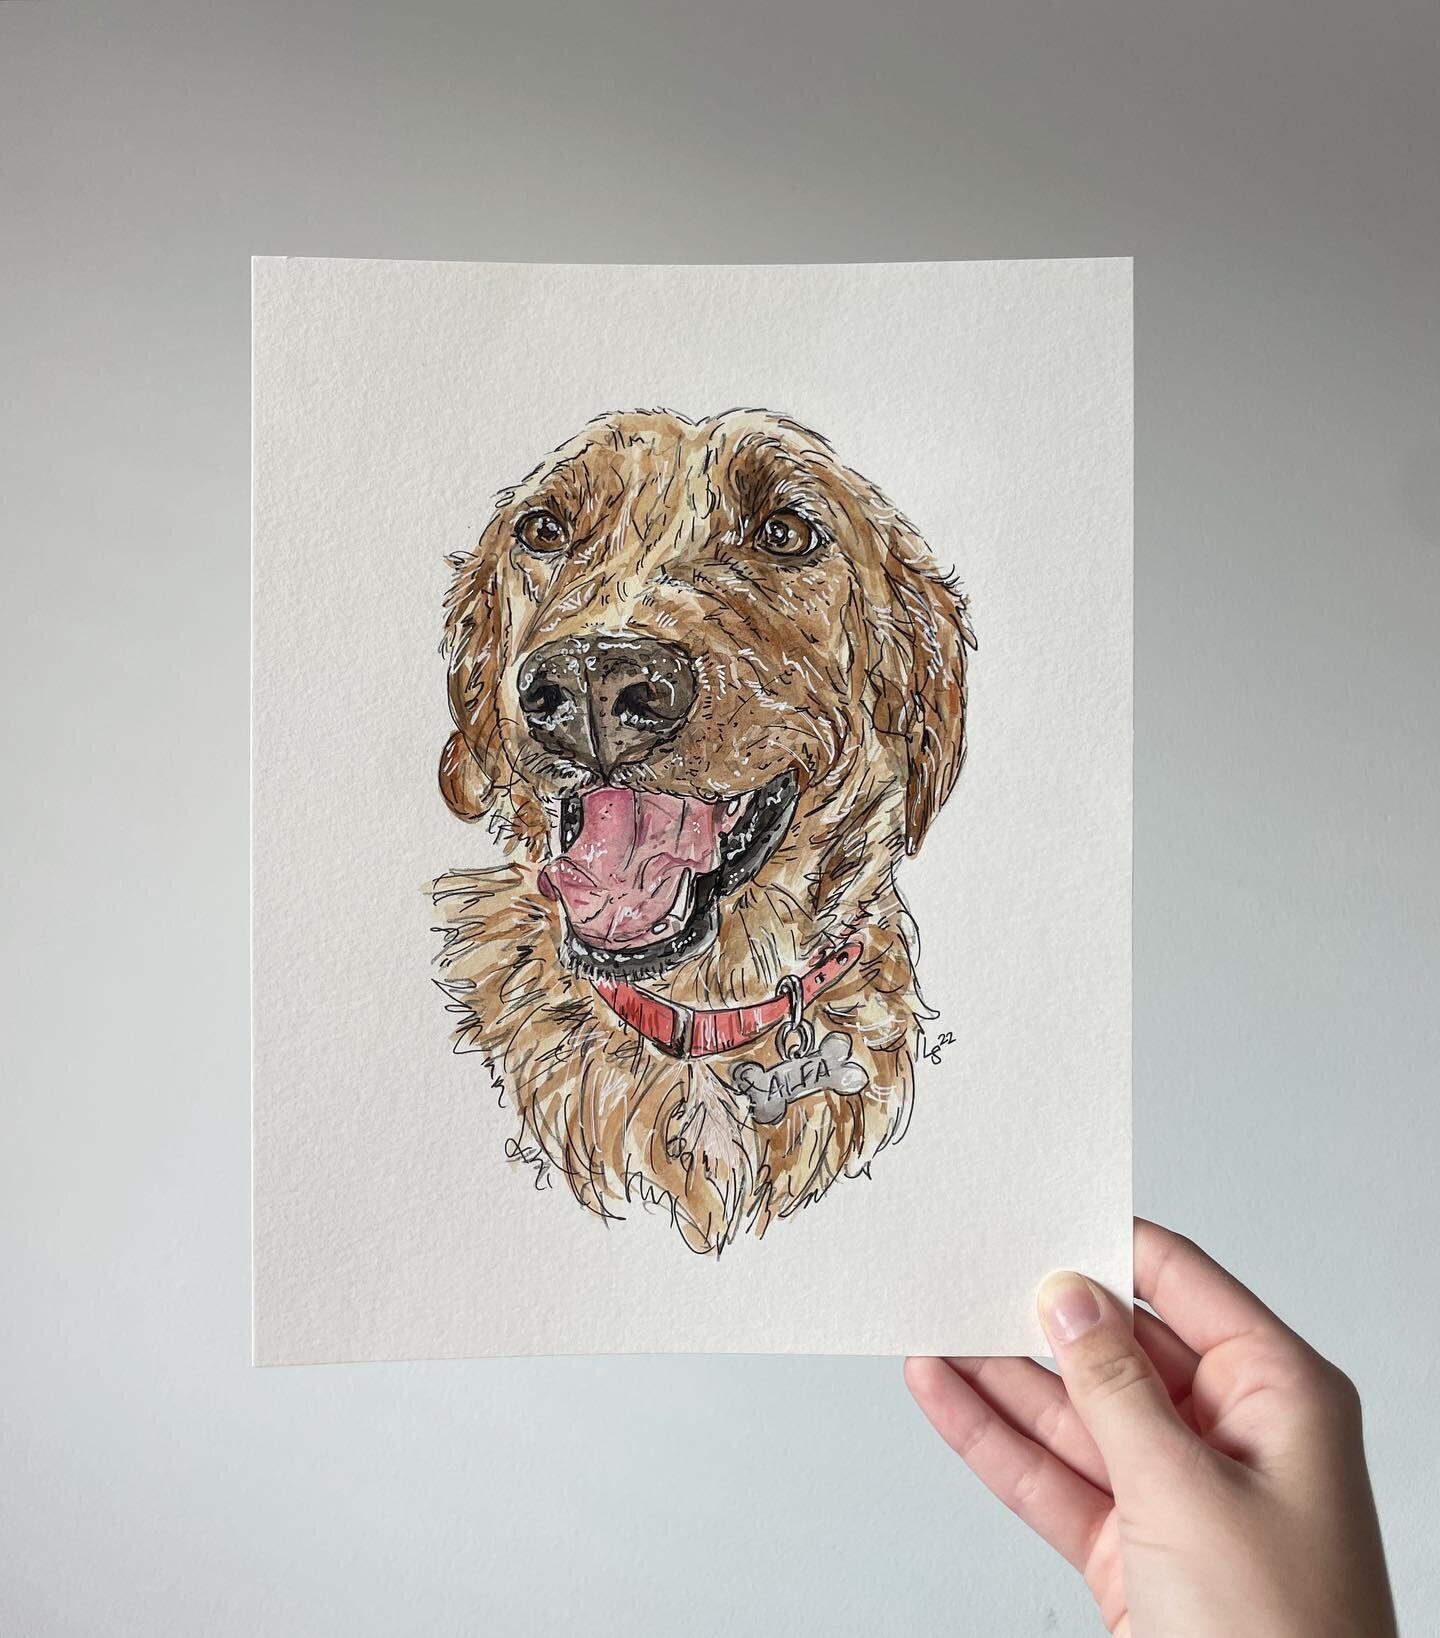 A pup with all the personality! Alfa lived the van life accompanying her owner in all of his travels 🧳🚐

8 x 10 watercolor + pen

#pet #petportrait #dog #travel #goldenretriever